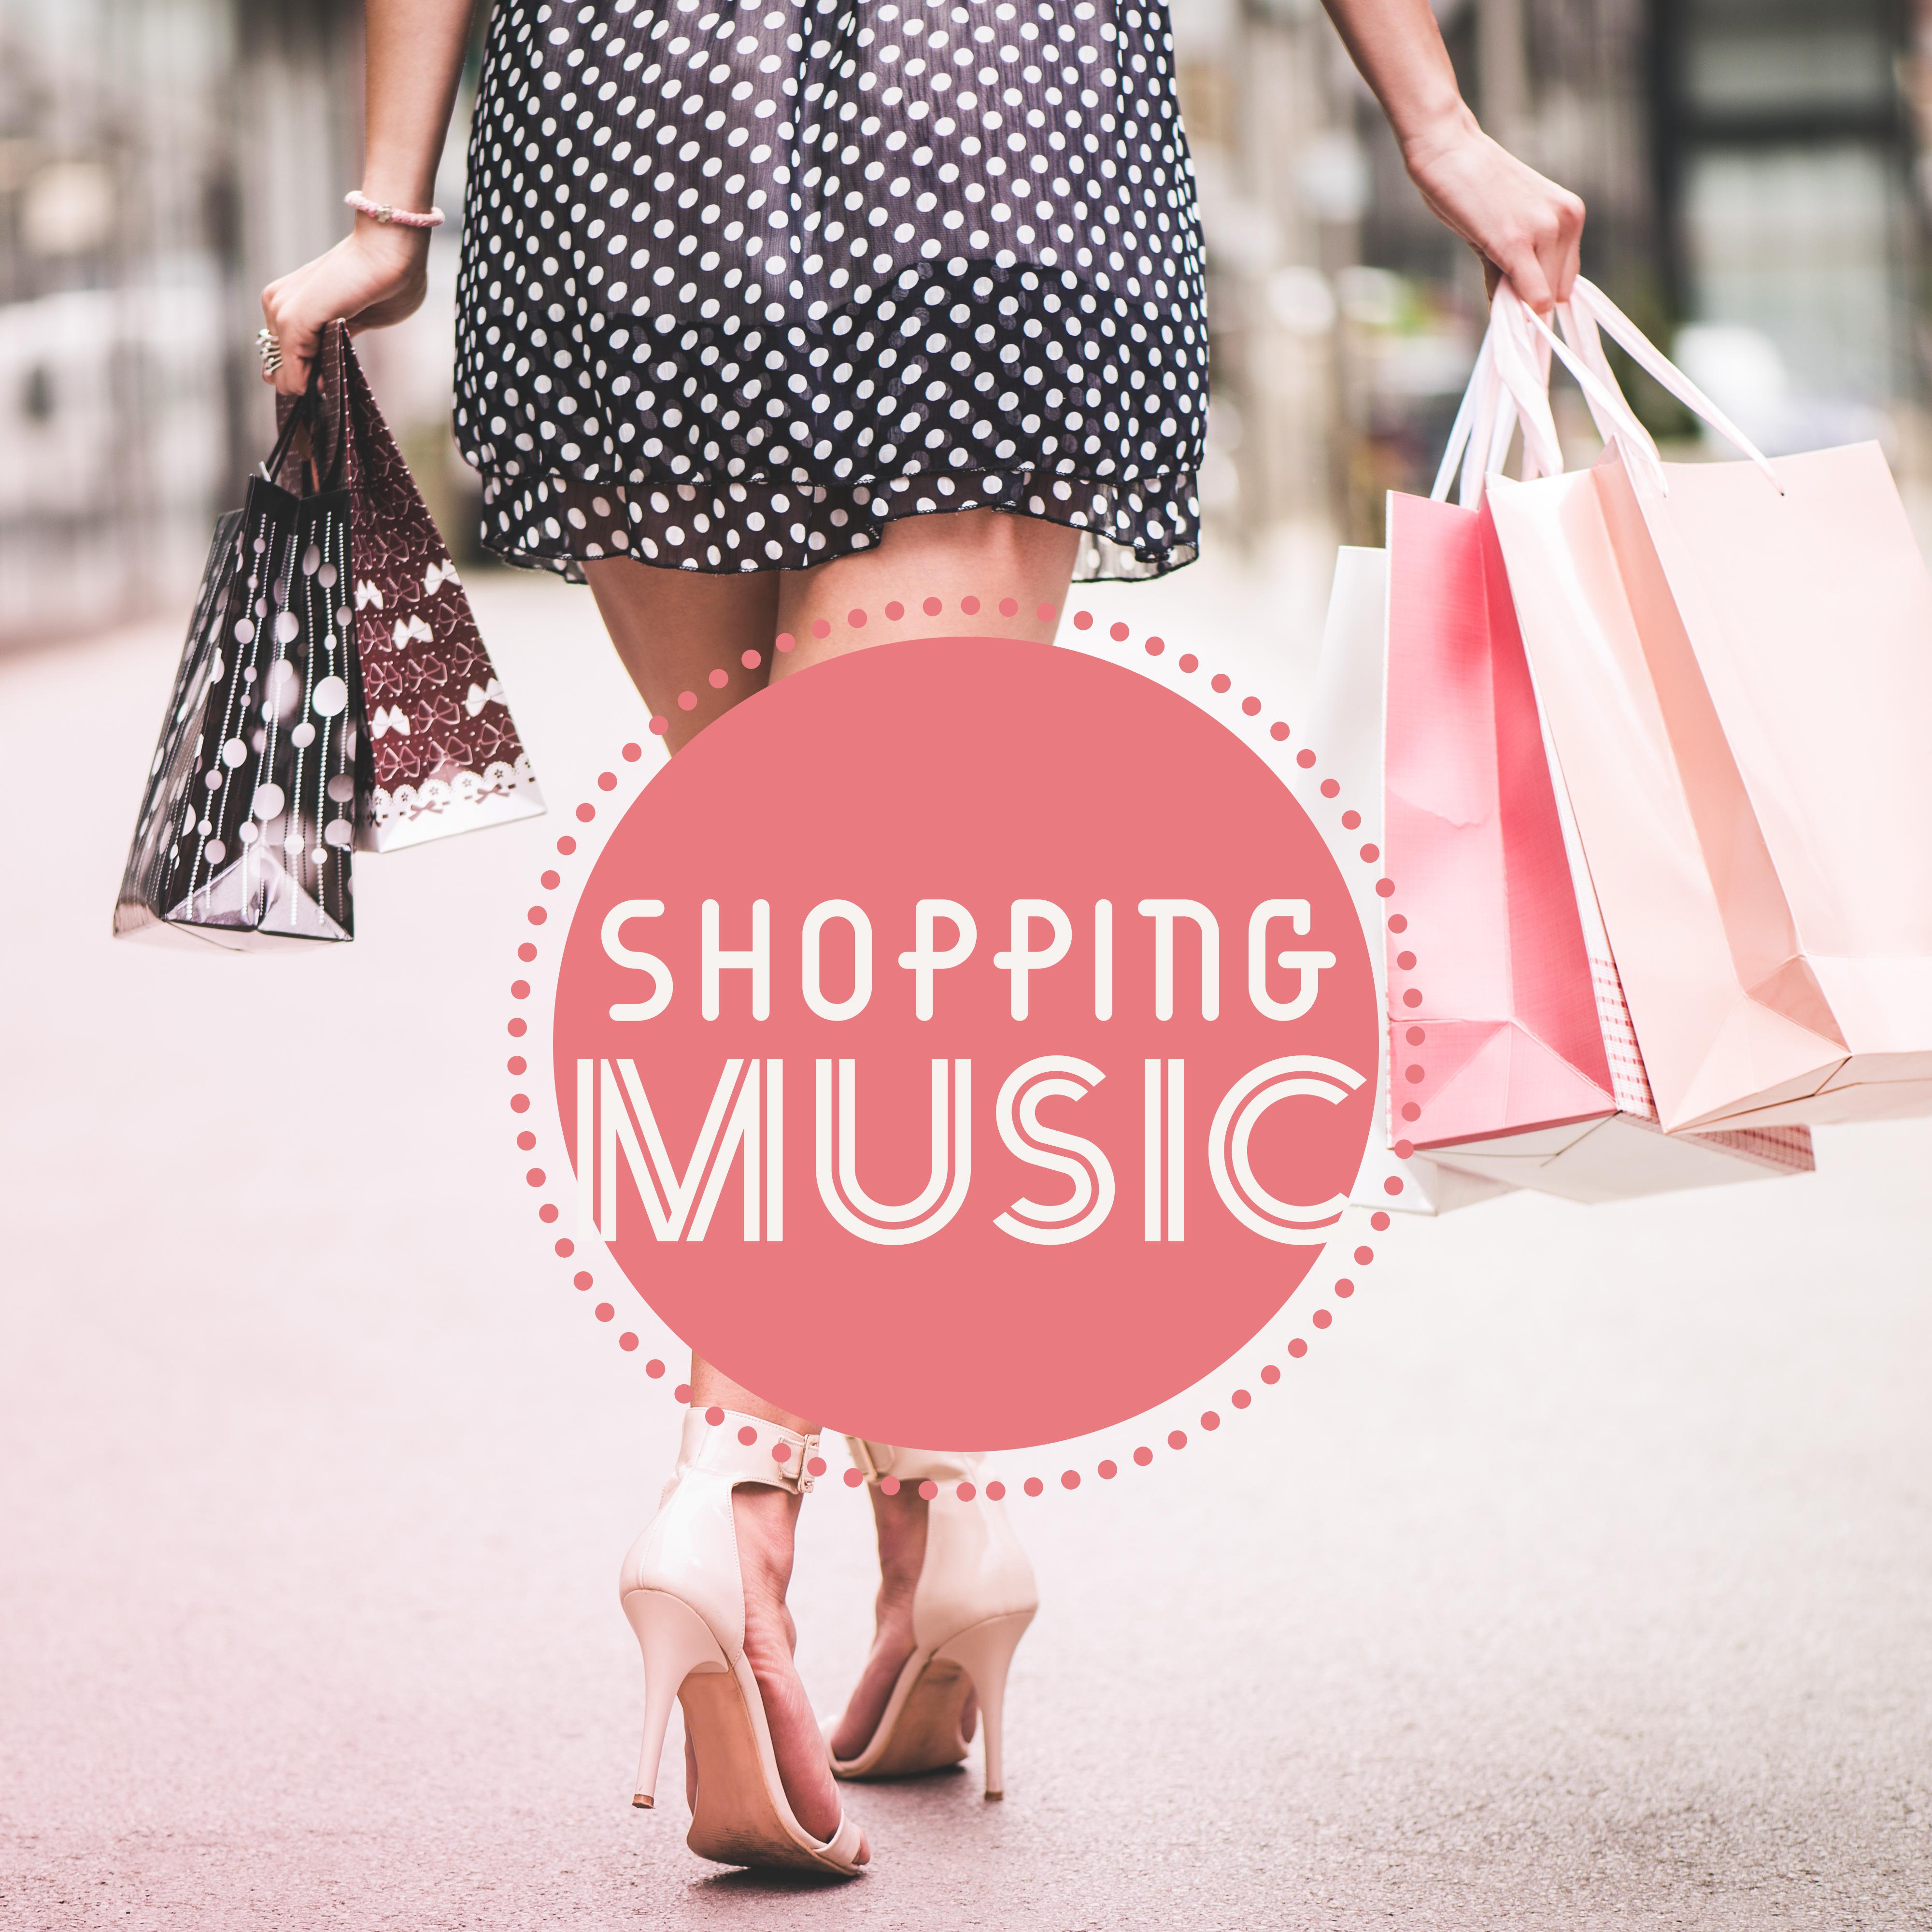 Shopping Music: Deep Vibes, Background Music for Shopping